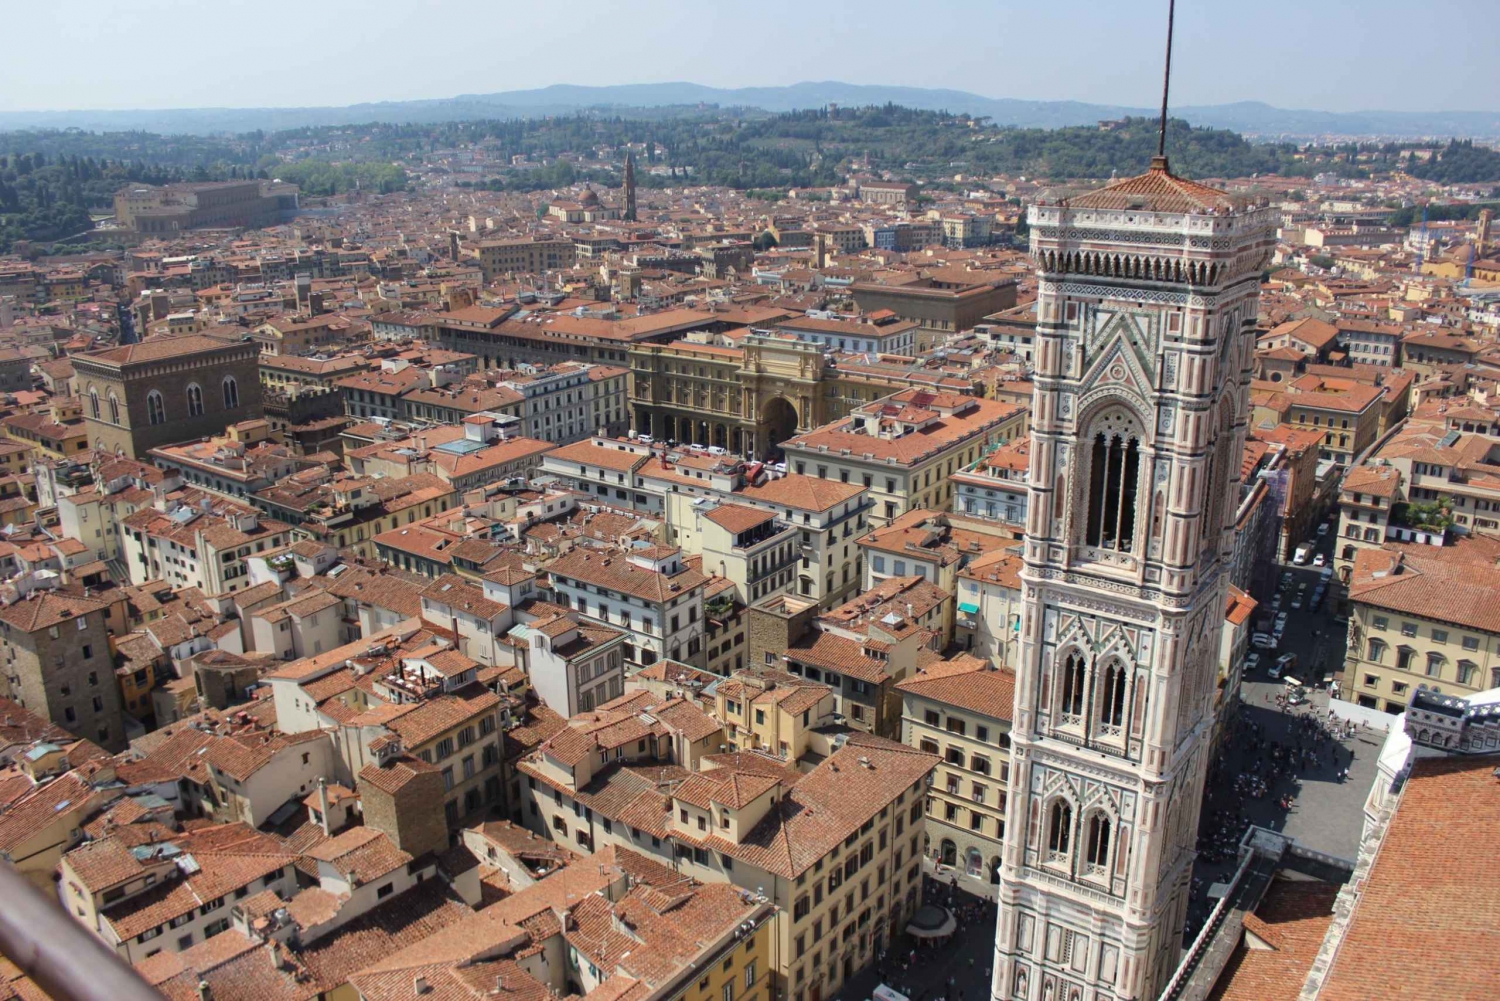 Florence: Entry to Brunelleschi's Dome and Cathedral Complex